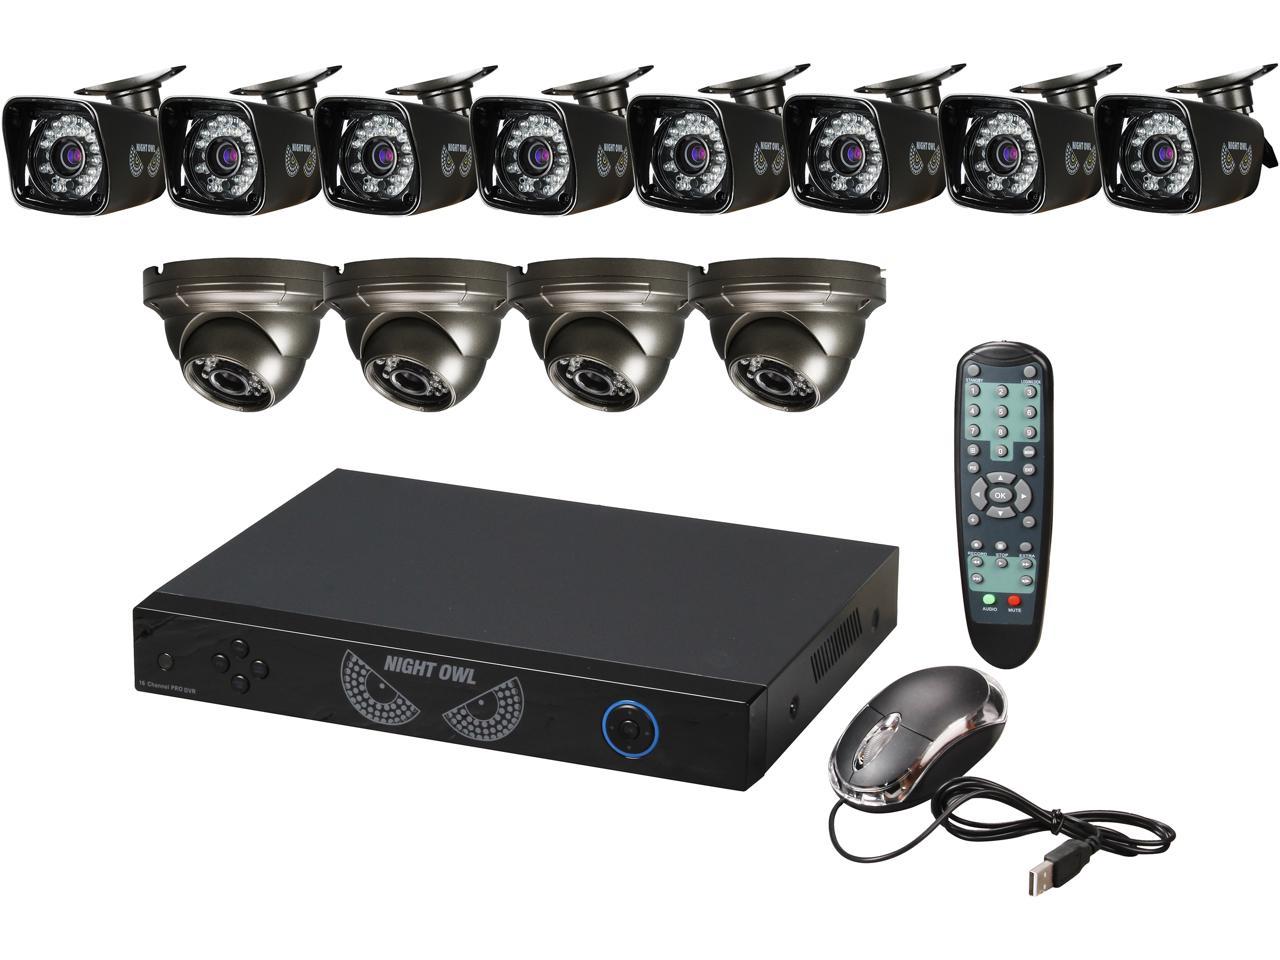 night owl security systems